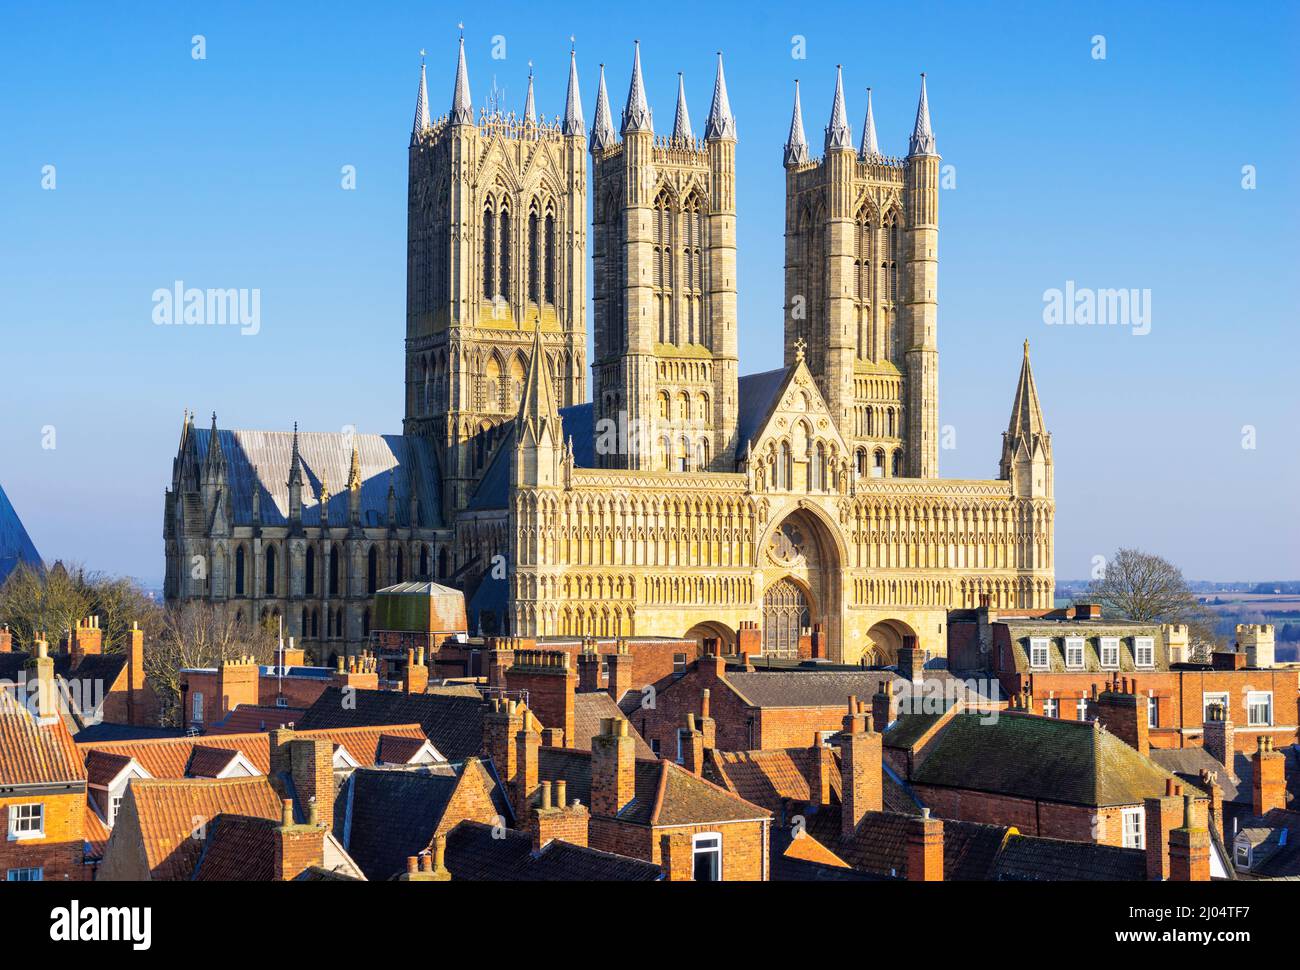 Lincoln Cathedral or Lincoln Minster behind the rooftops of the City of Lincoln Lincolnshire England UK GB Europe Stock Photo